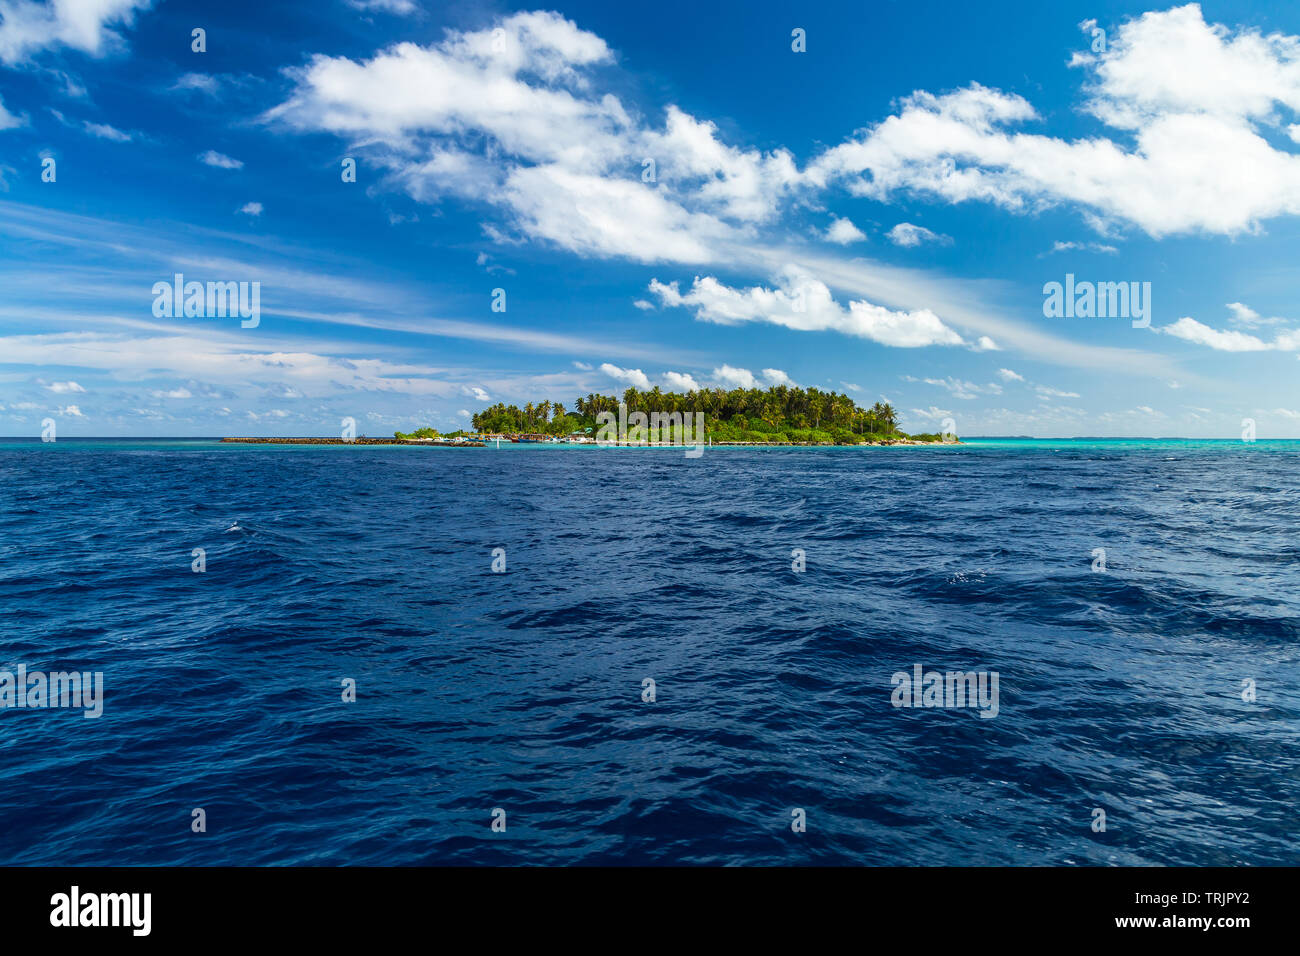 view from boat on sea ocean of tropical paradise maldives island resort with coral reef and turquoise blue ocean tourism blue summer sky background Stock Photo